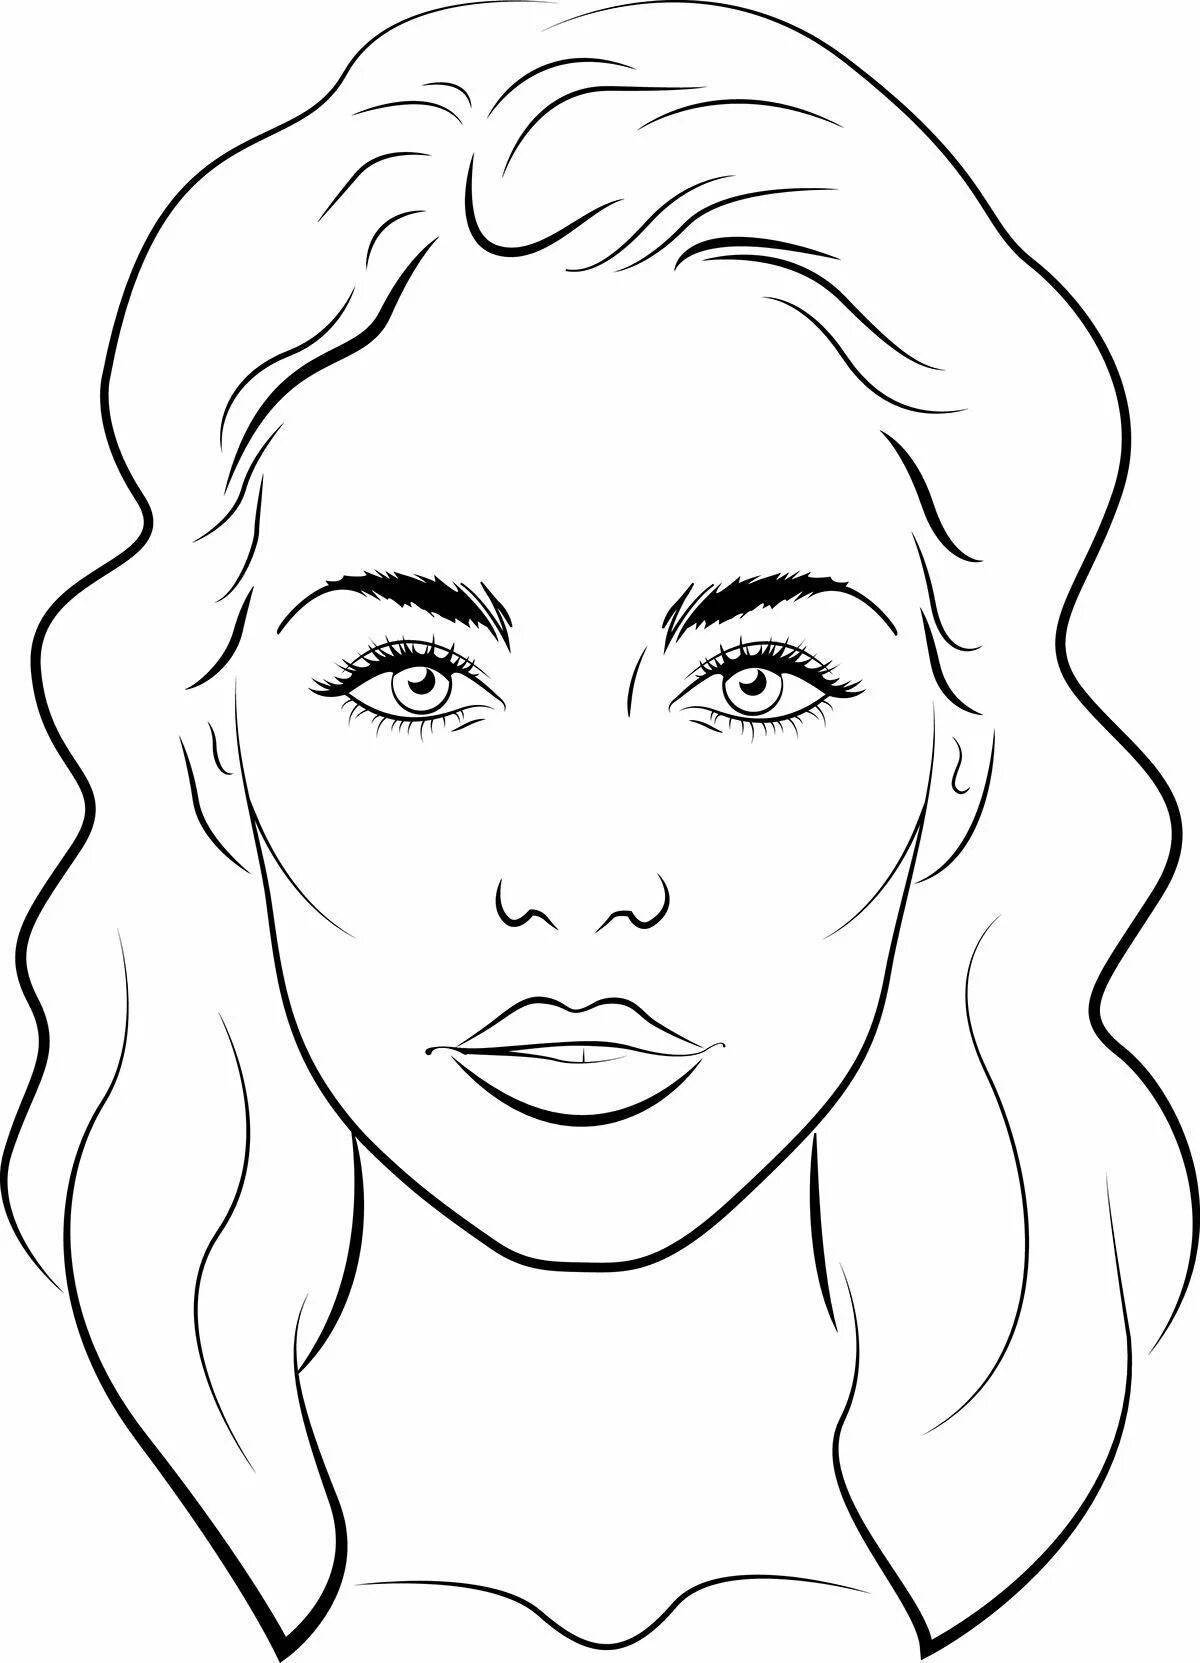 Coloring page of a woman's face with bright makeup